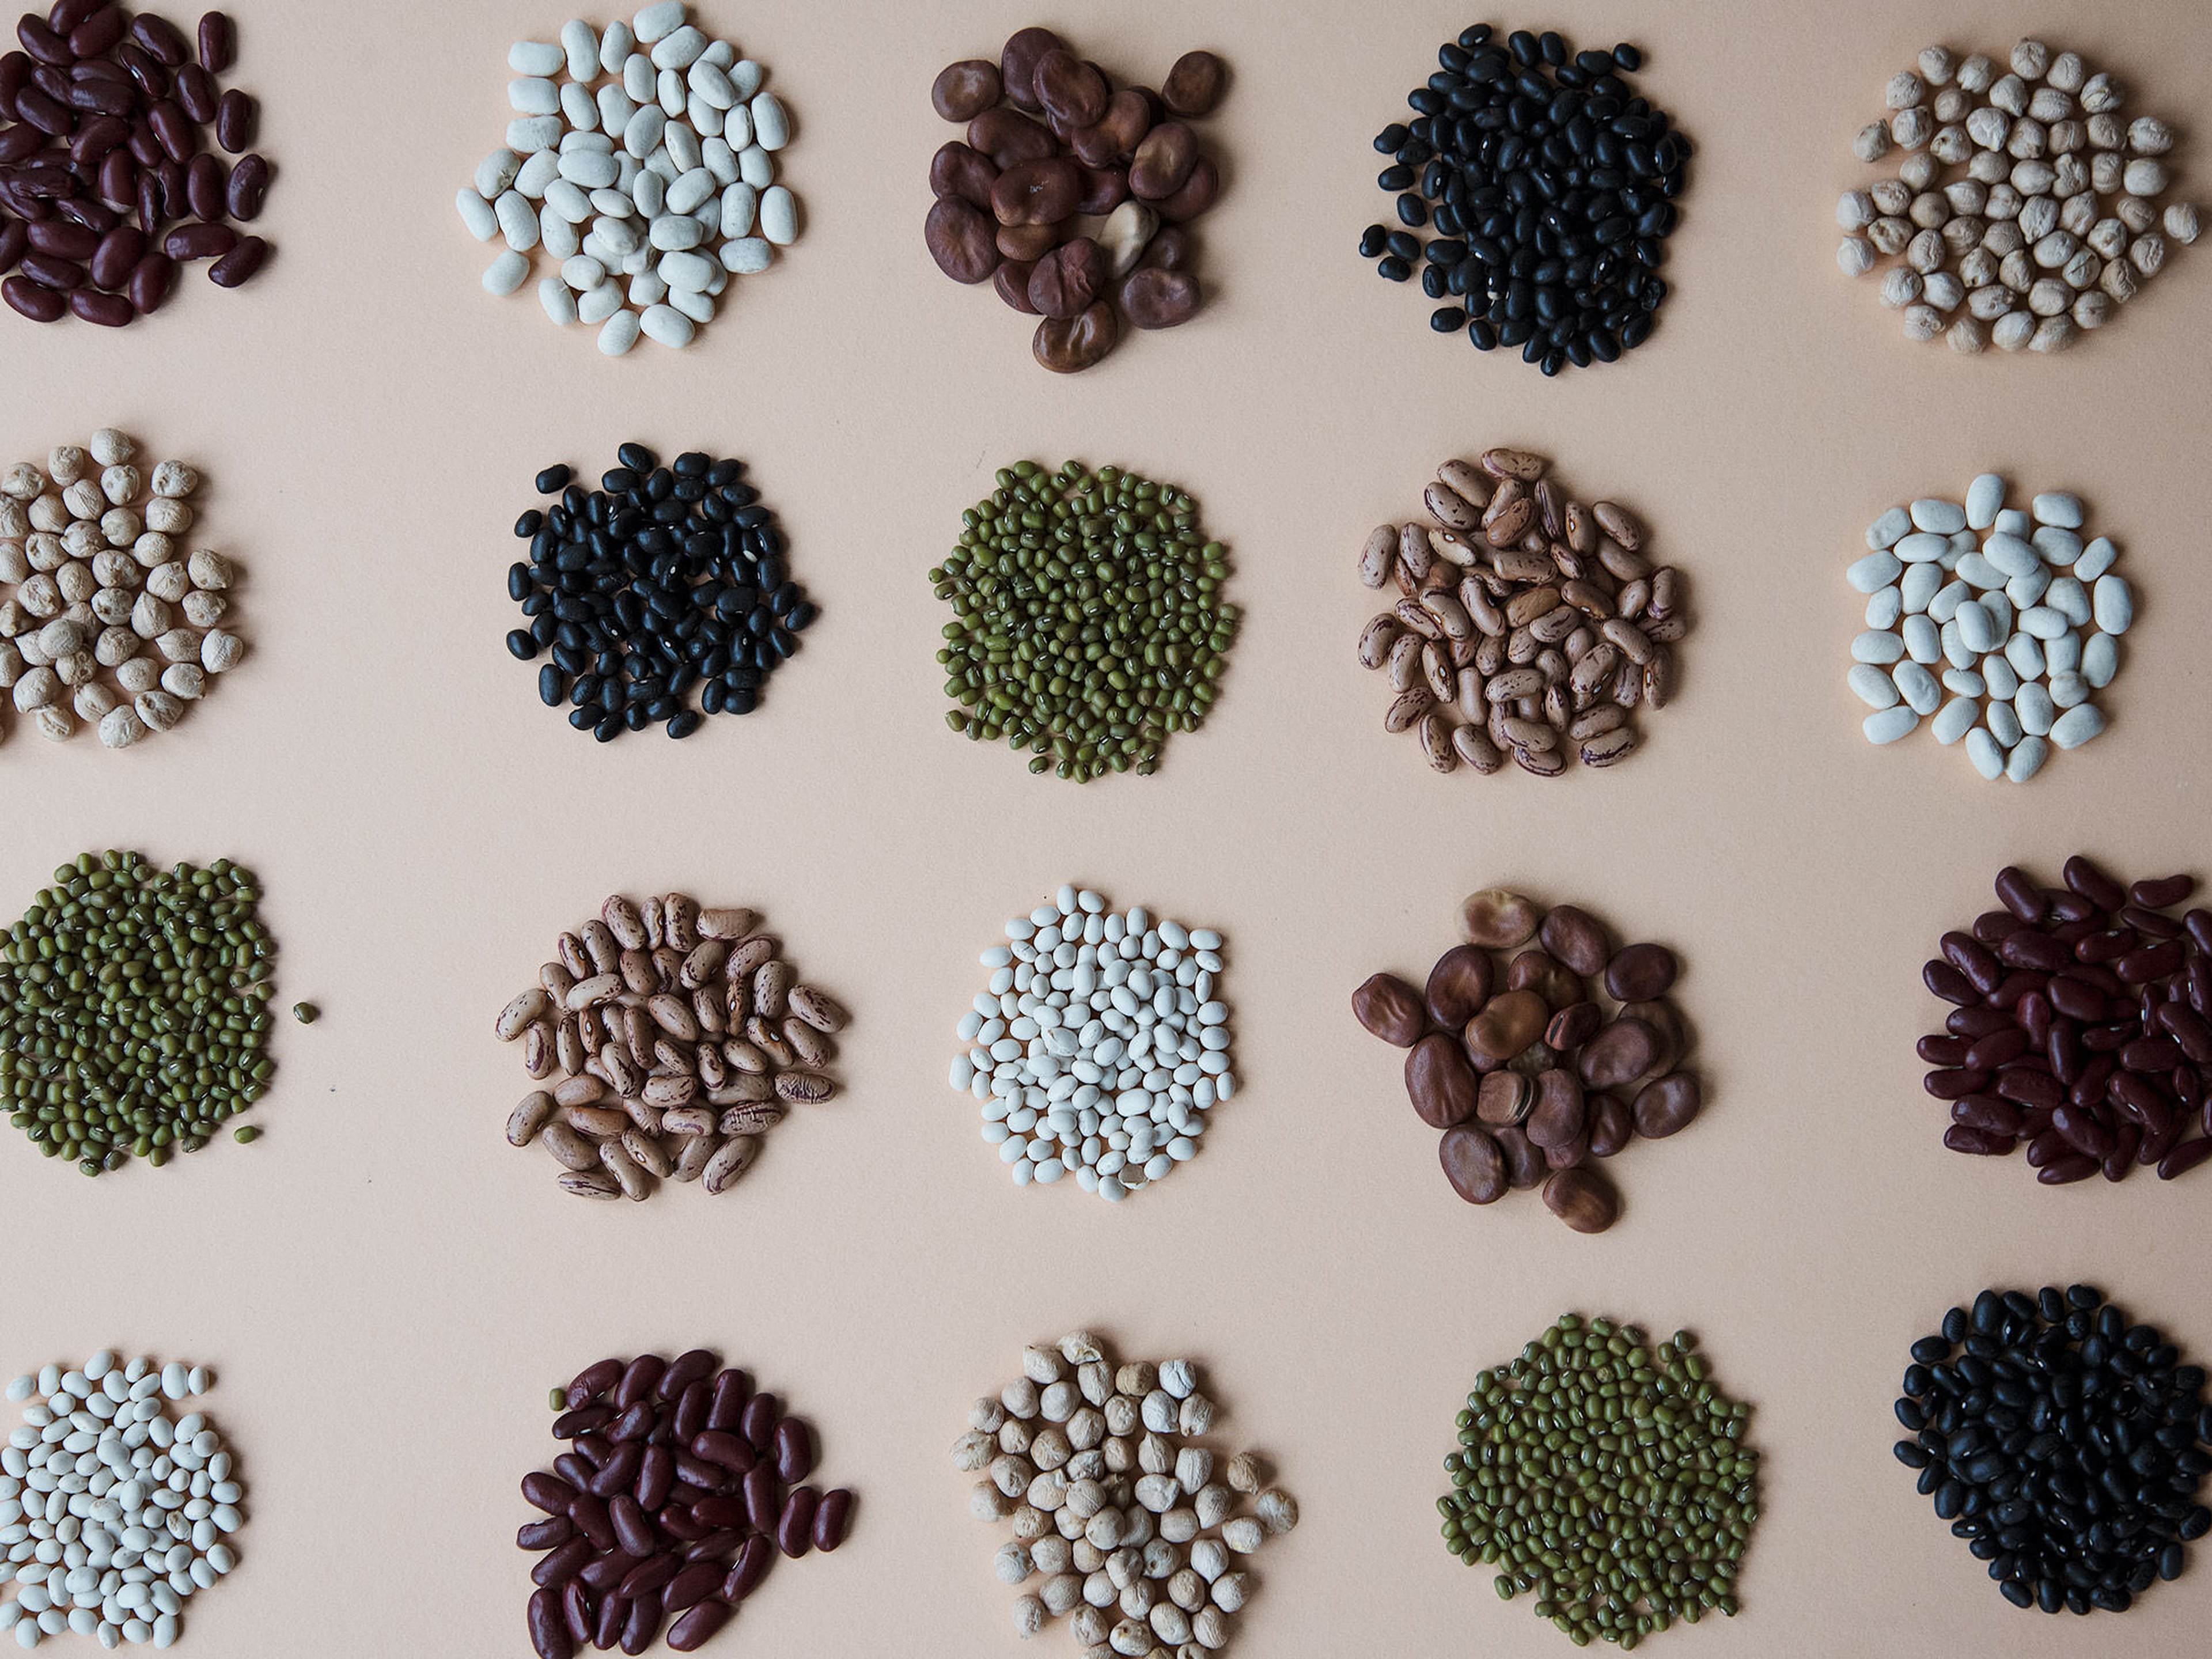 3 Reasons Dried Beans Are Better (Plus, How to Prepare Them)